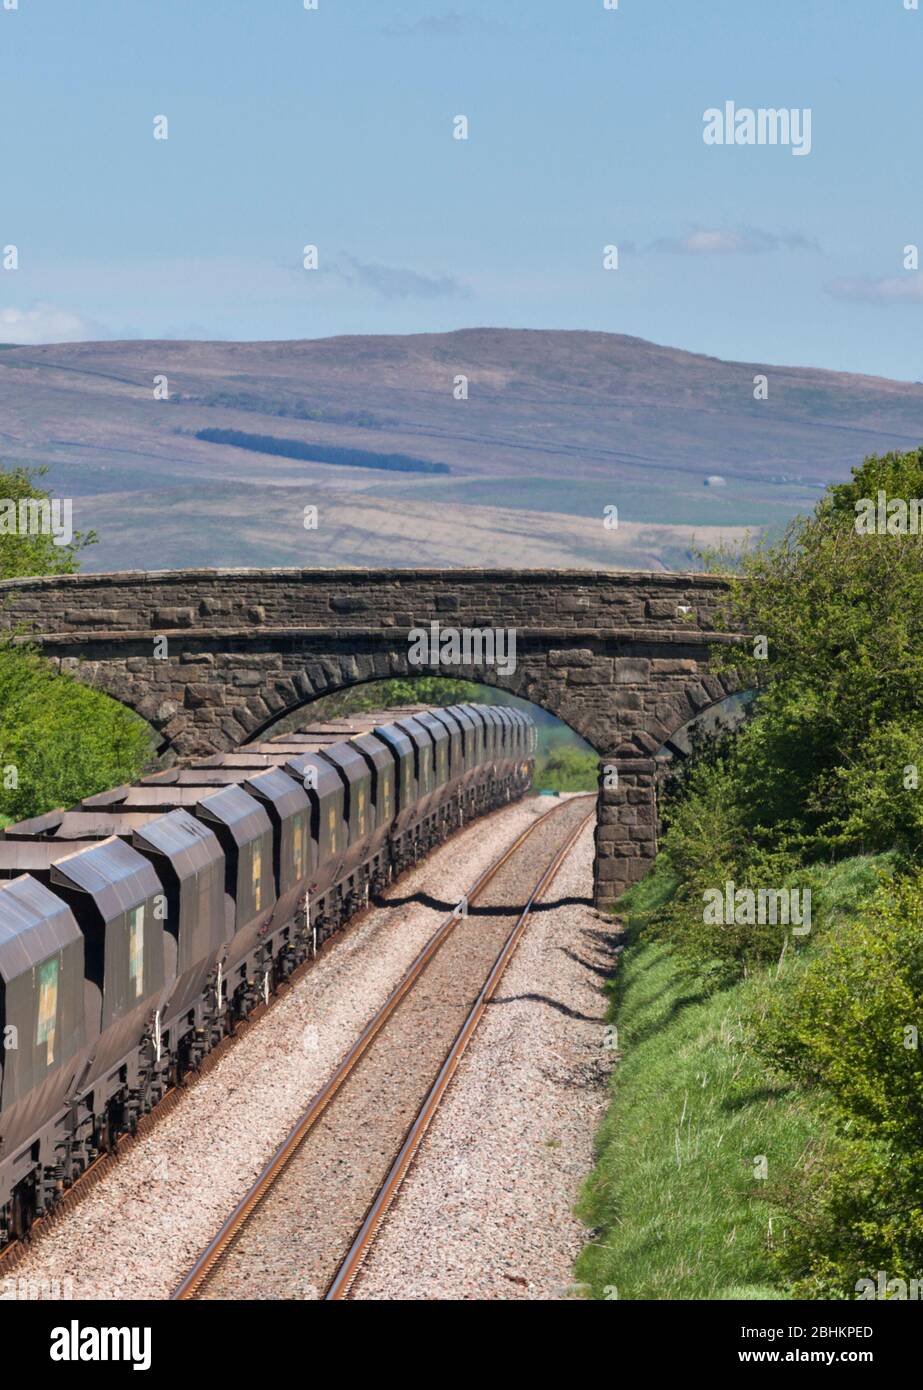 Freightliner 'Merry go round' coal freight train cresting the summit on the railway line at Paythorne, on the Blackburn to Hellifiled railway Stock Photo